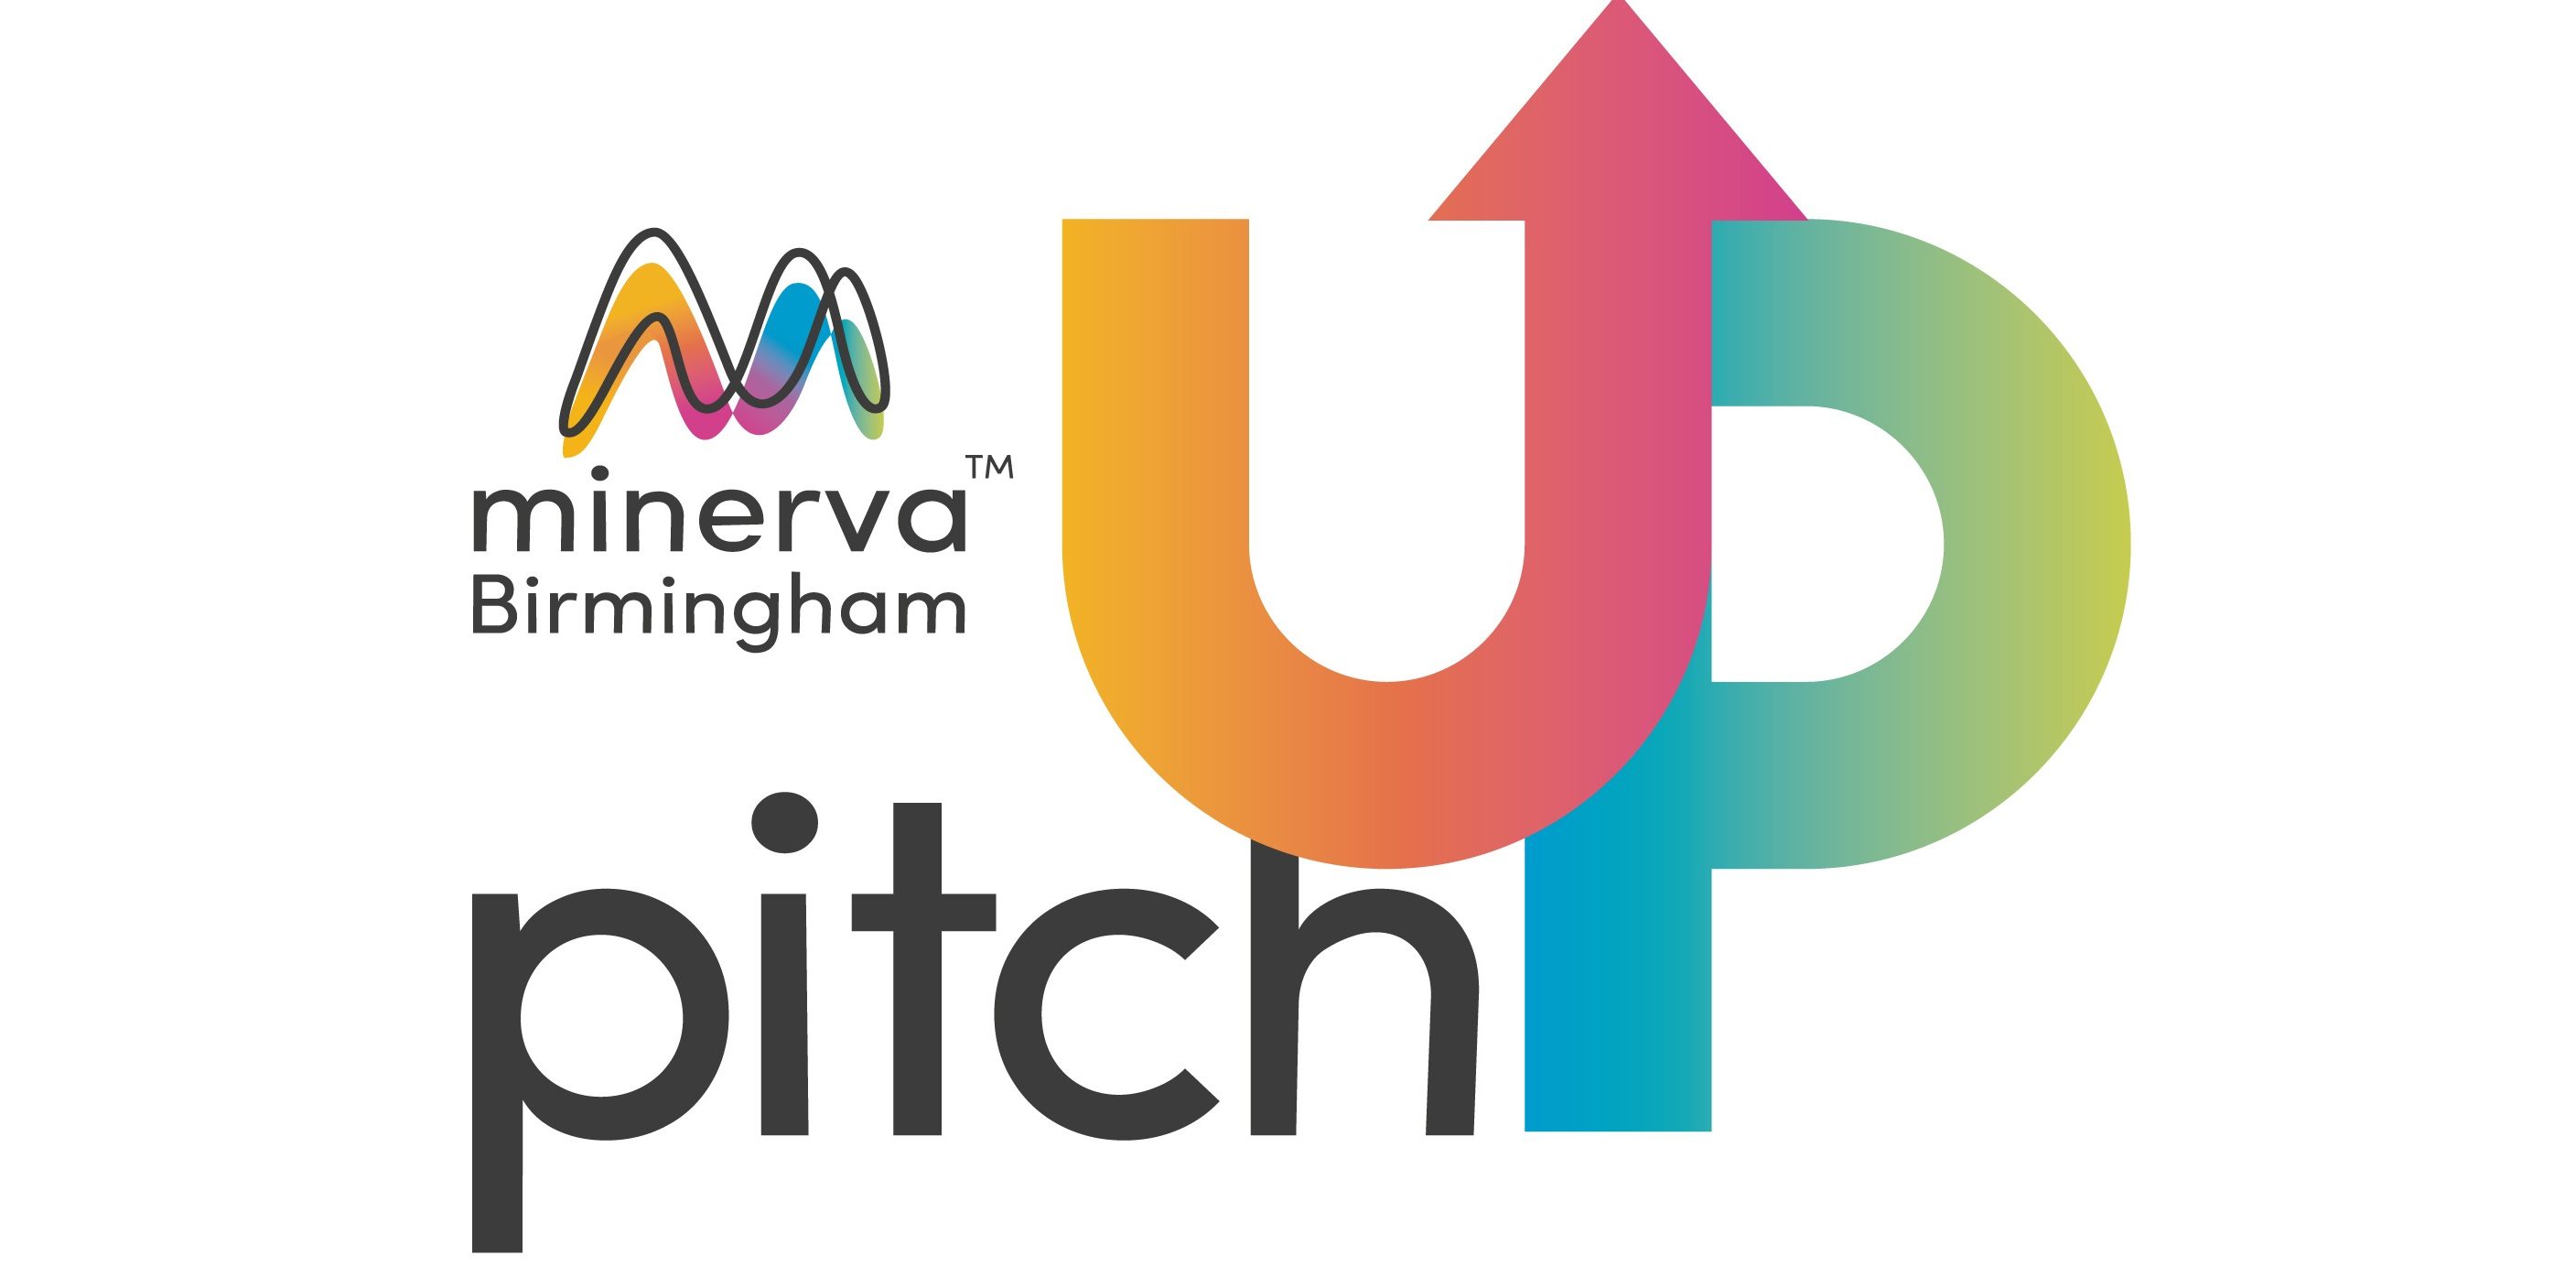 Midlands’ Pitch Up investment competition opens for applications